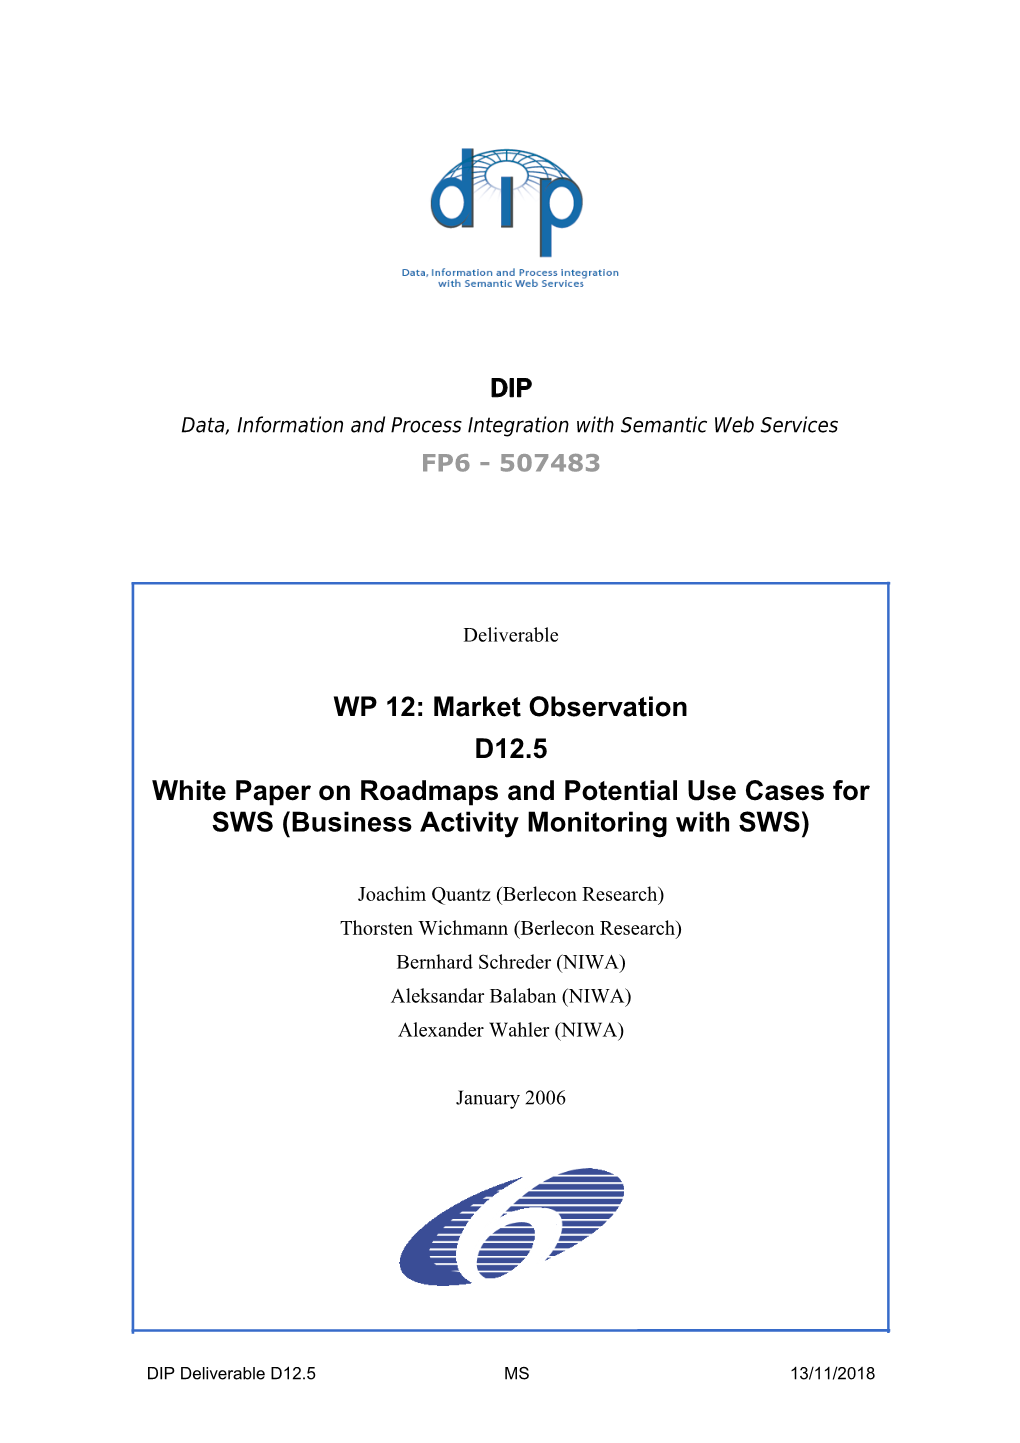 Data, Information and Process Integration with Semantic Web Services